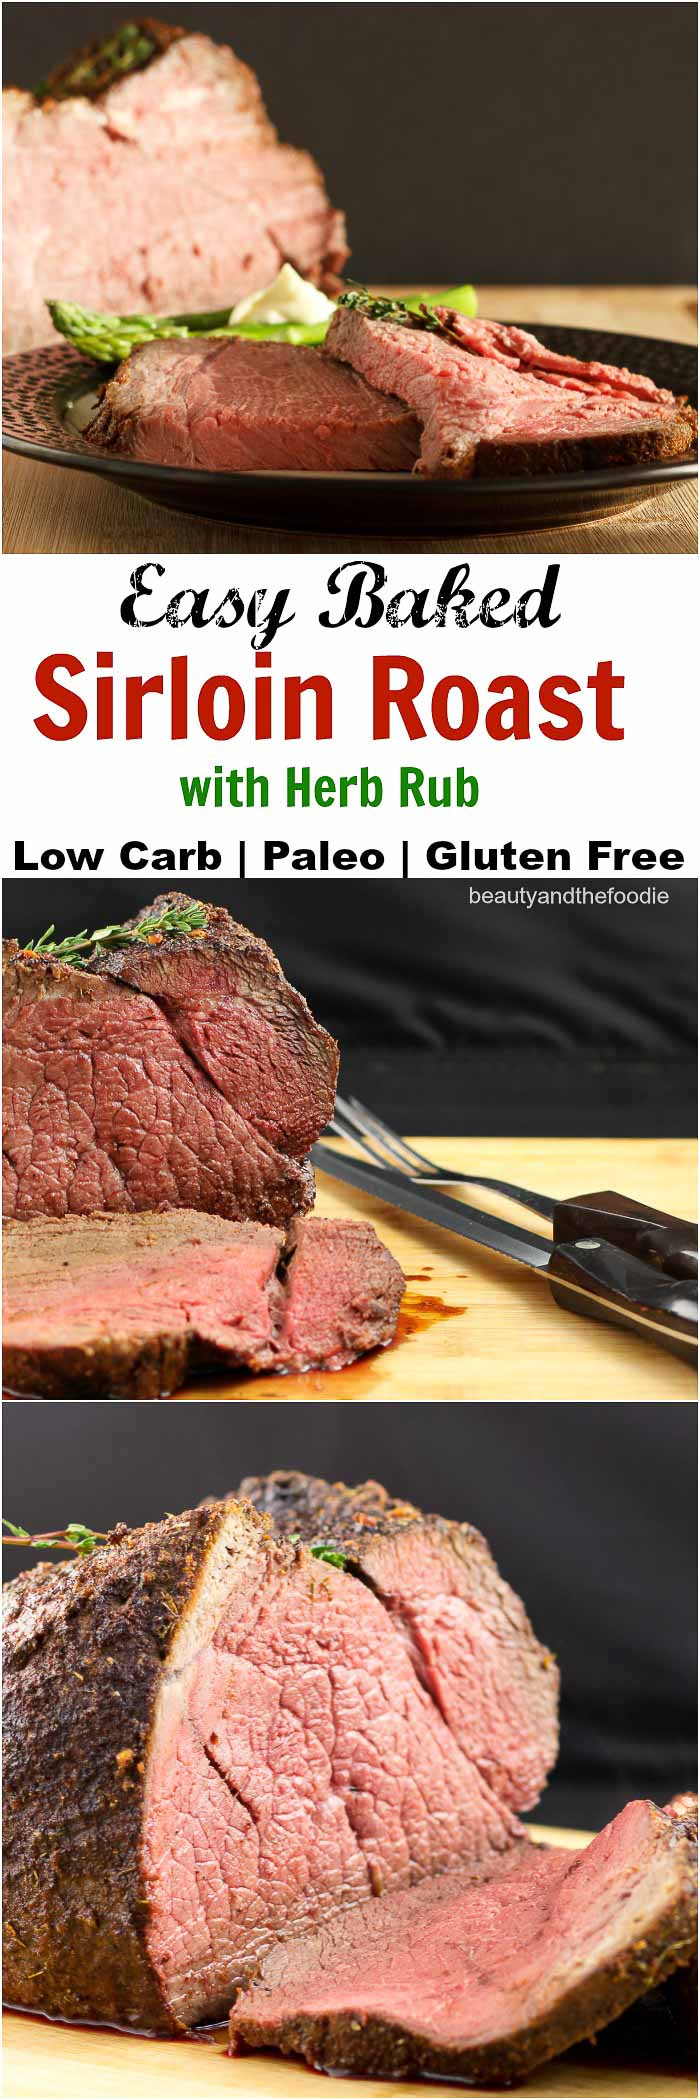 Easy Baked Sirloin Roast with Herb Rub- Low Carb, Keto, and Paleo. #sponsored